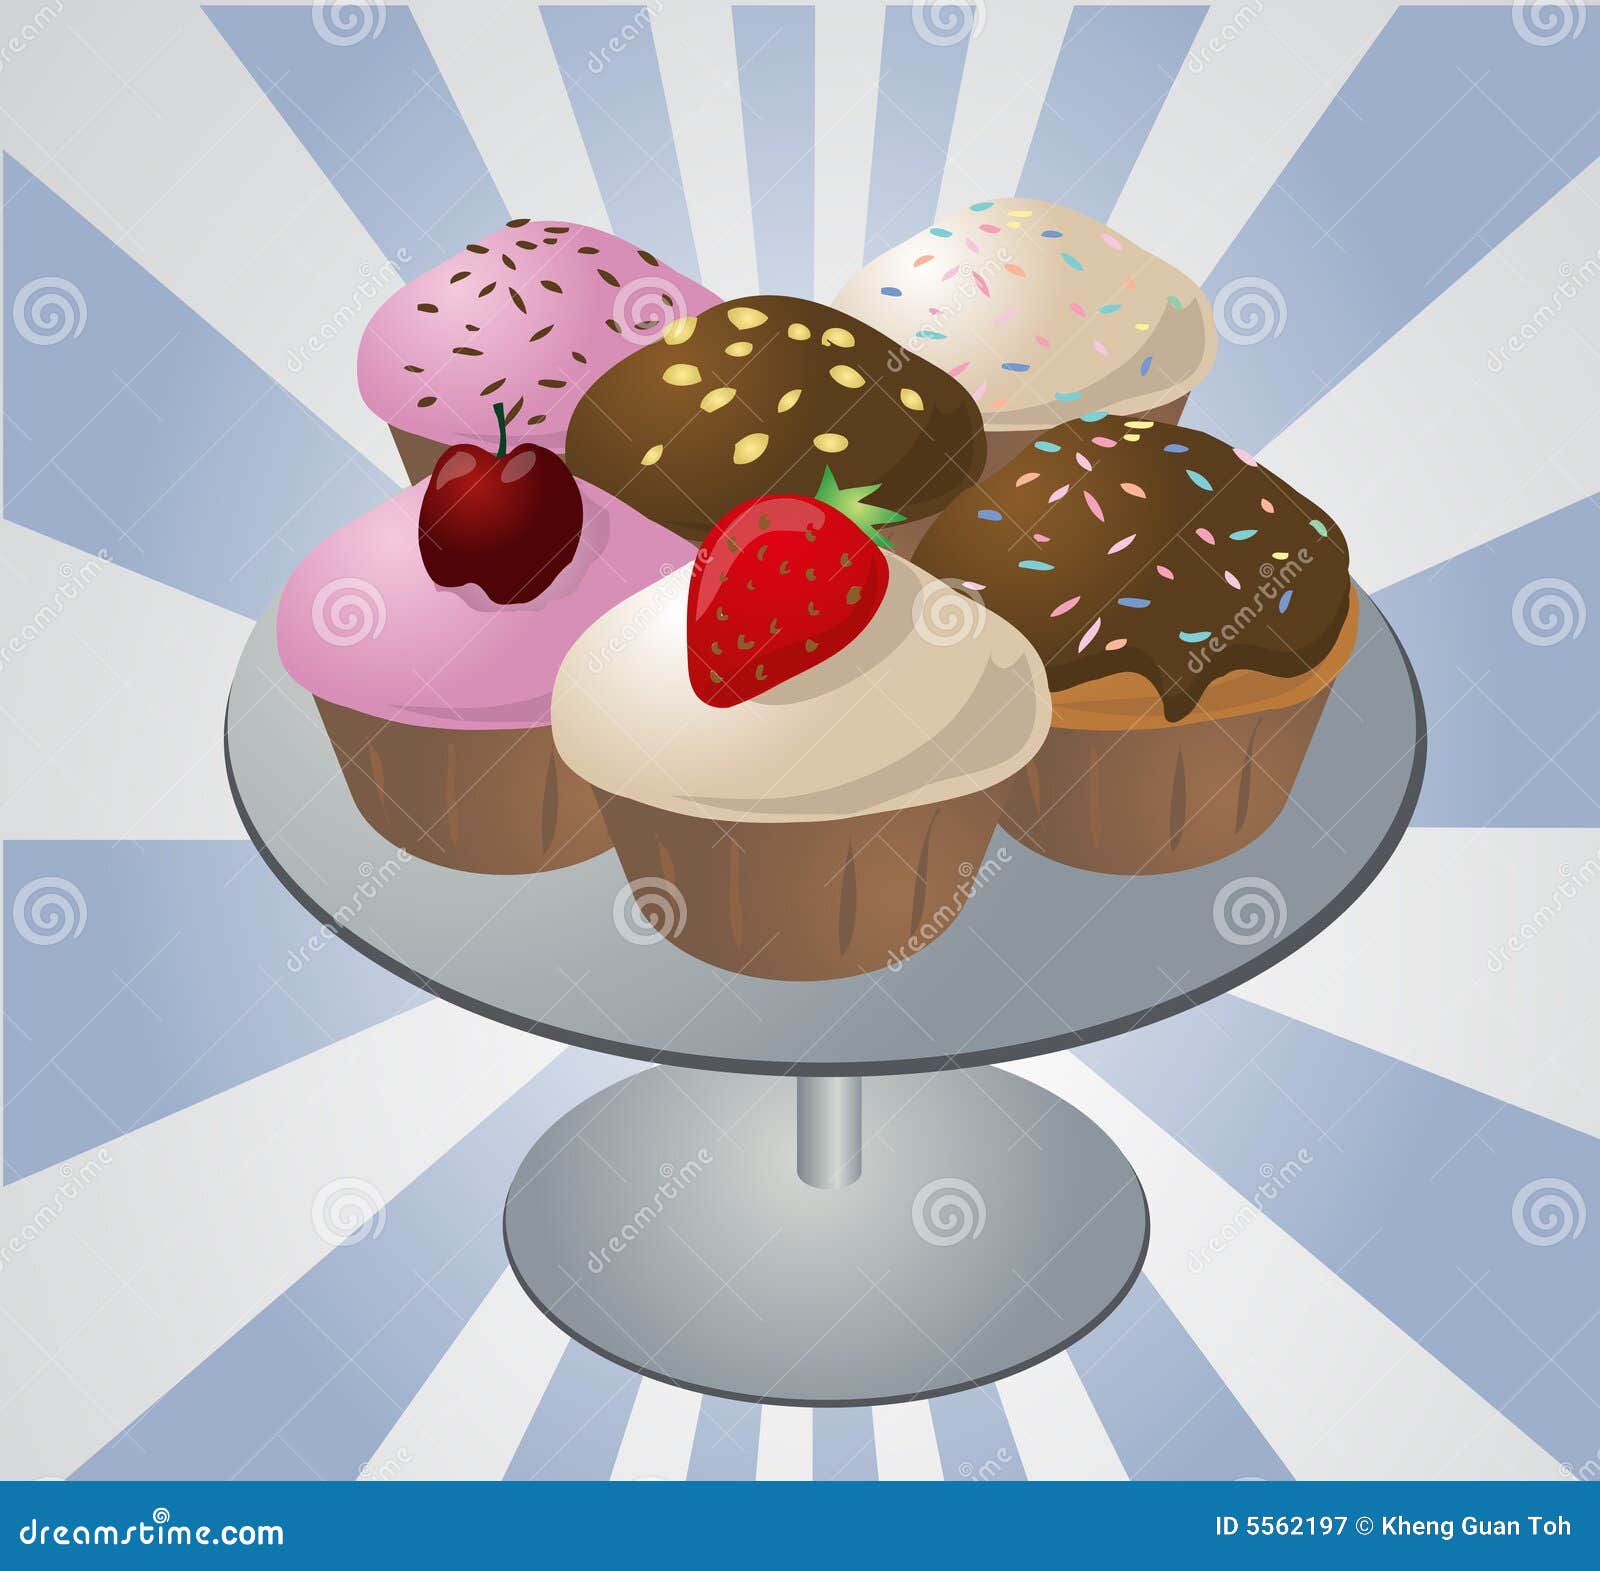 cup plate clipart - photo #26